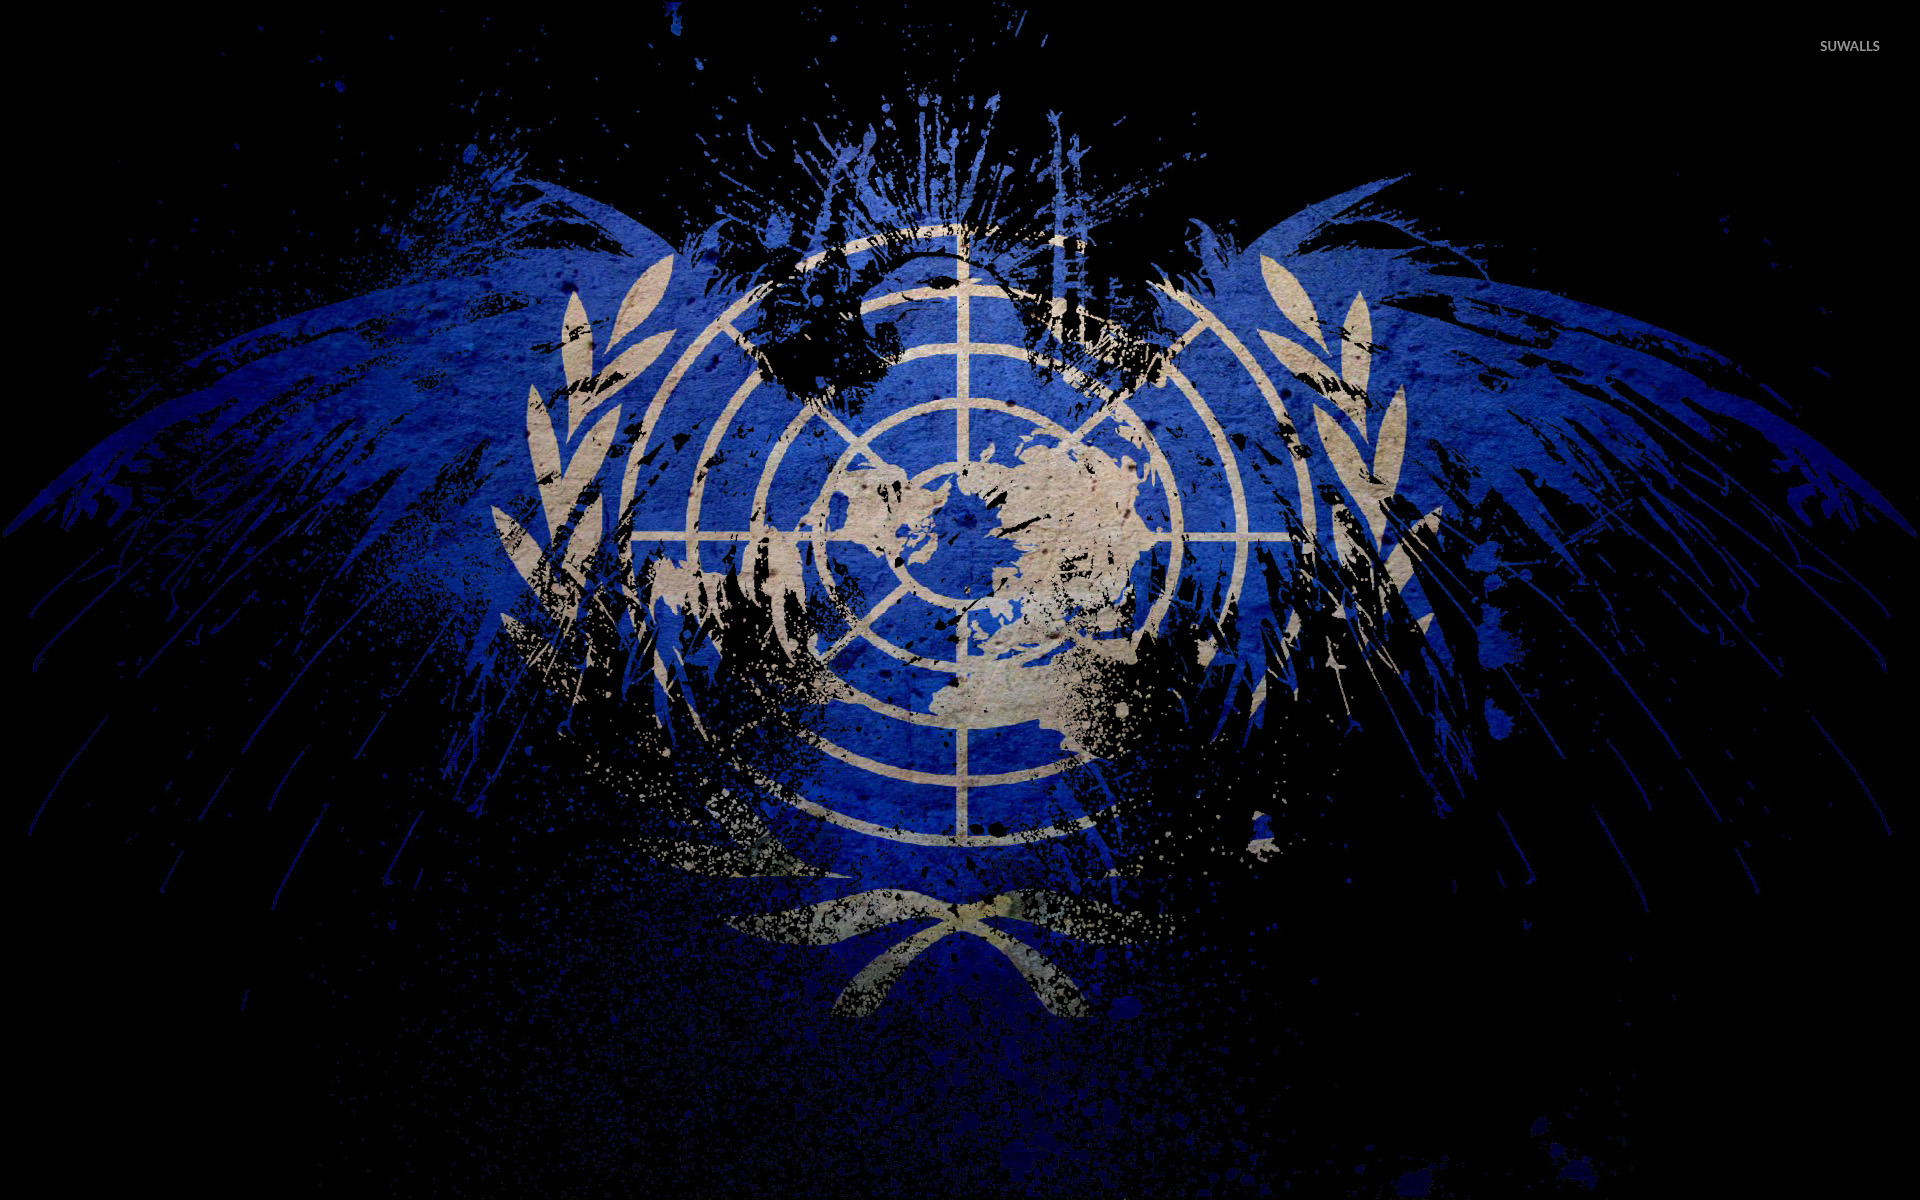 United Nations Wallpaper On